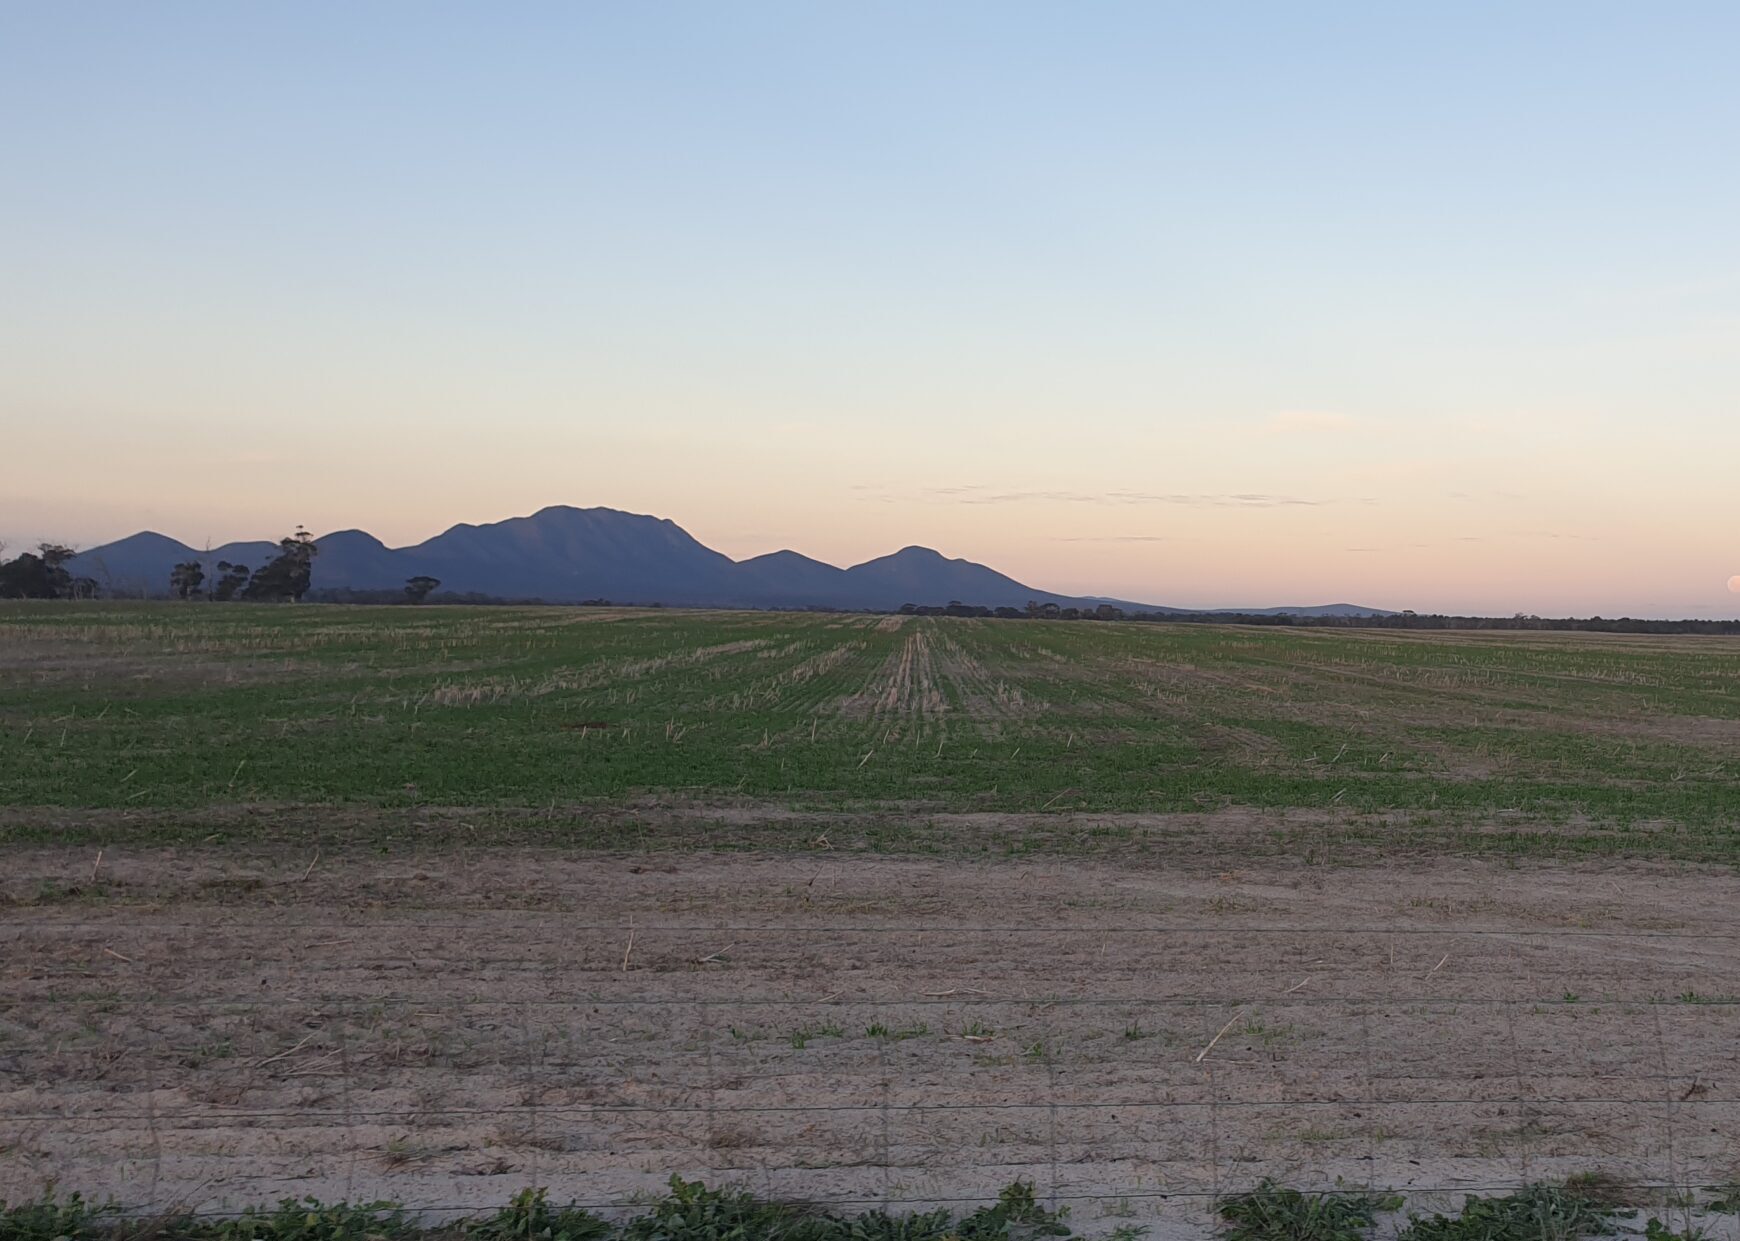 Landscape at sunset with rolling mountains in the background